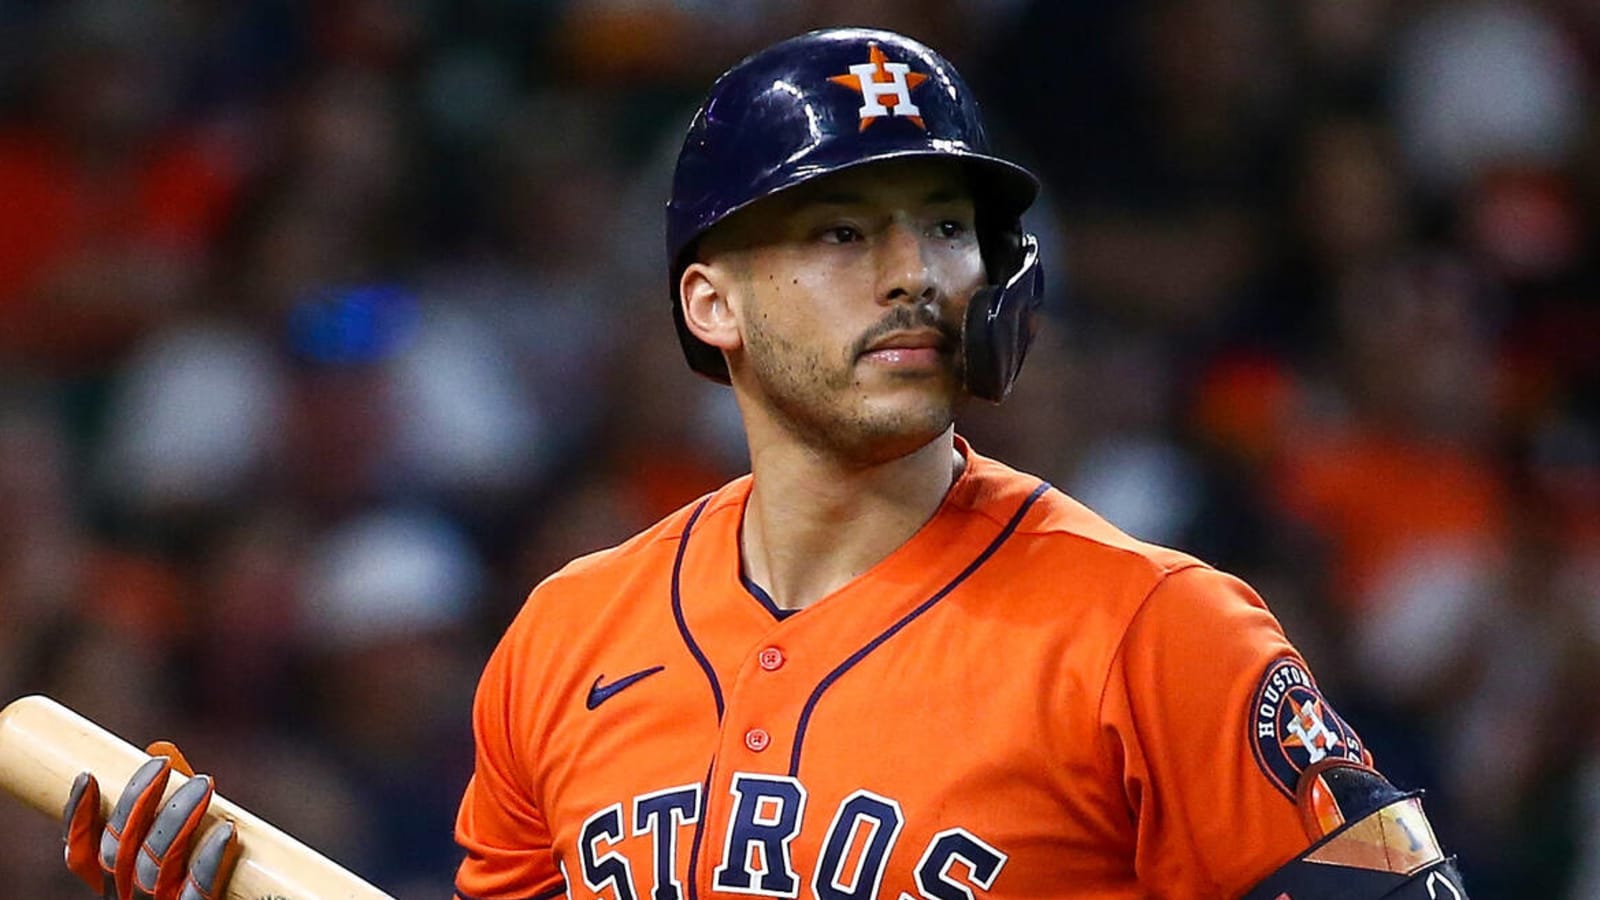 Carlos Correa says he got no post-lockout offers from Astros